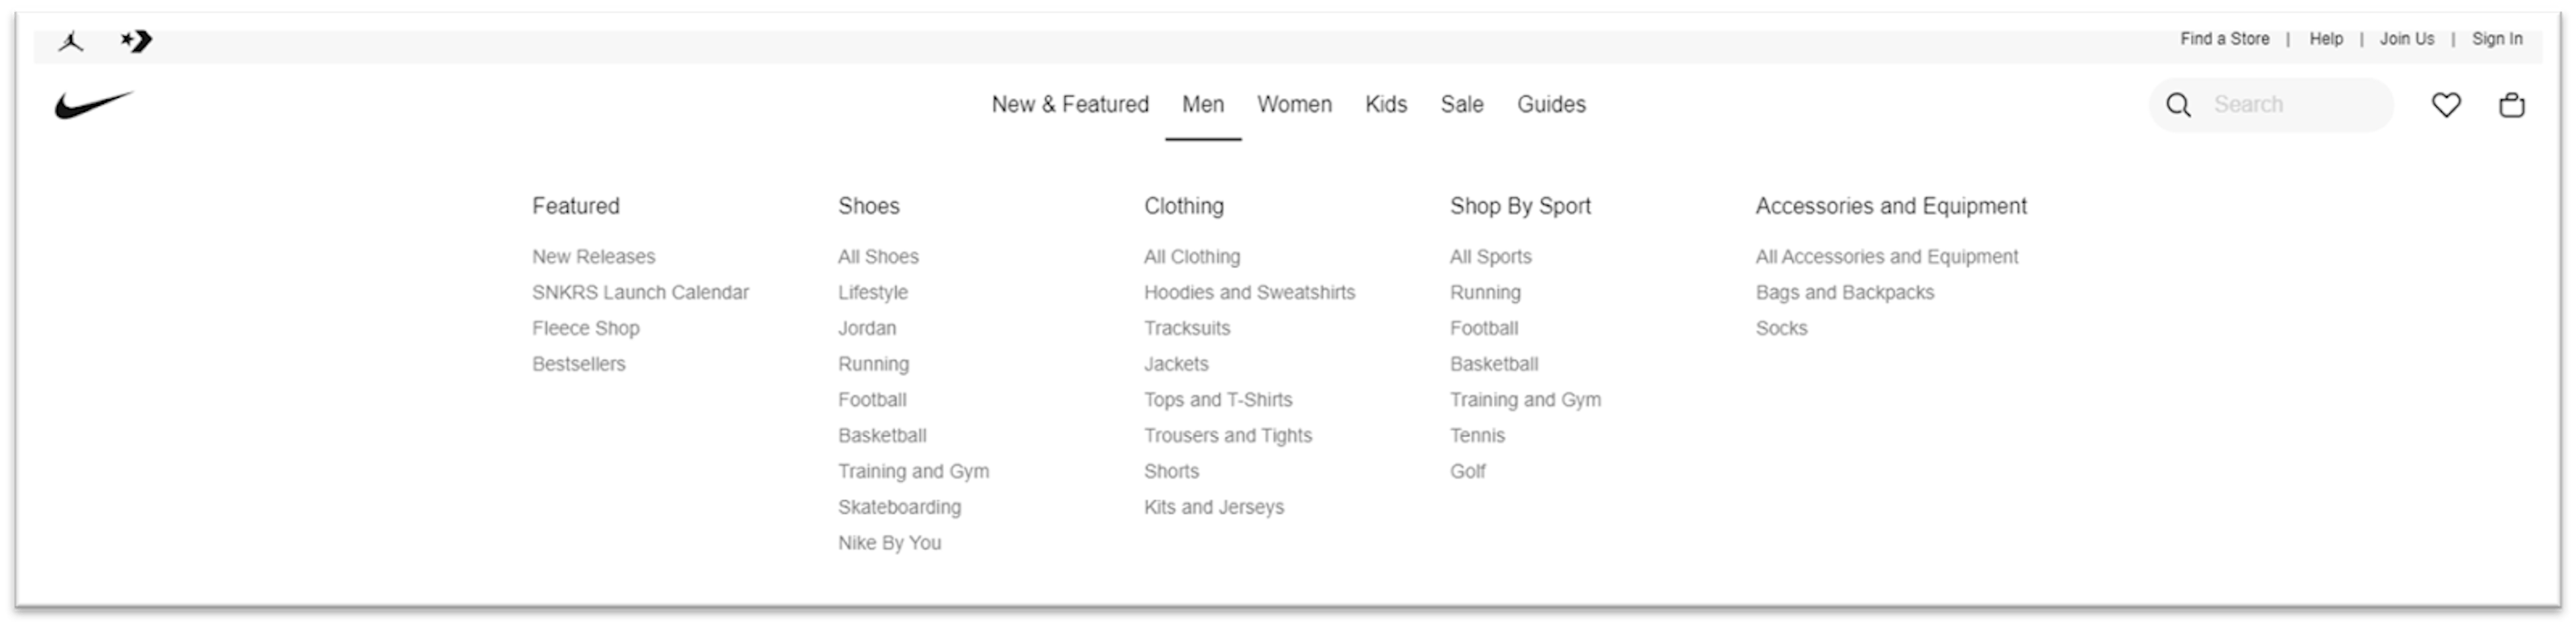 Nike.com product category structure in PLP